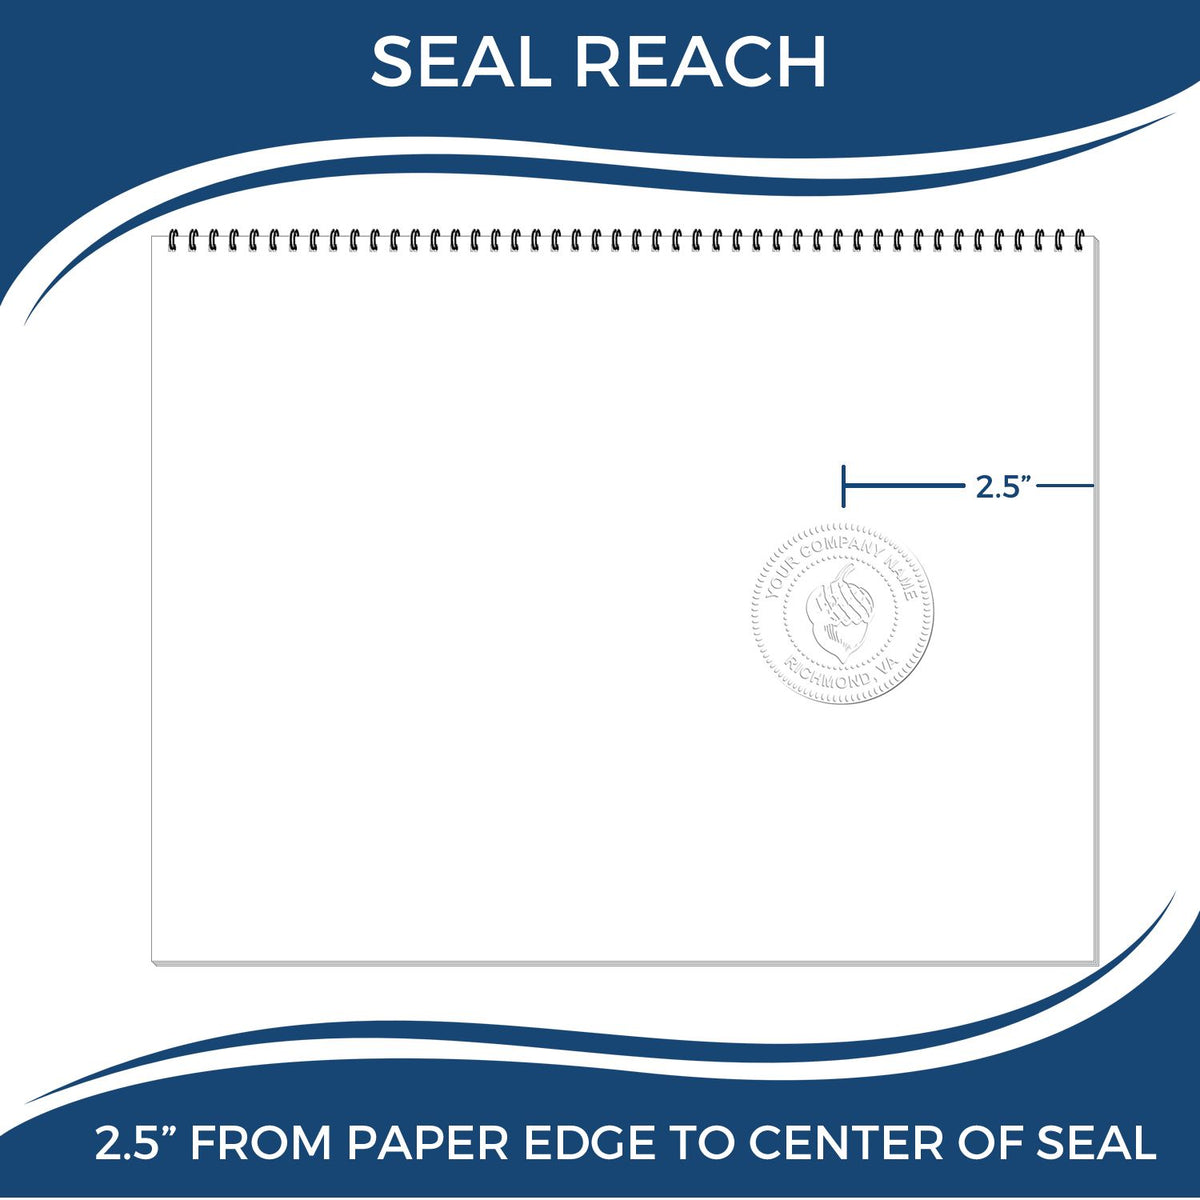 An infographic showing the seal reach which is represented by a ruler and a miniature seal image of the Long Reach Massachusetts Geology Seal